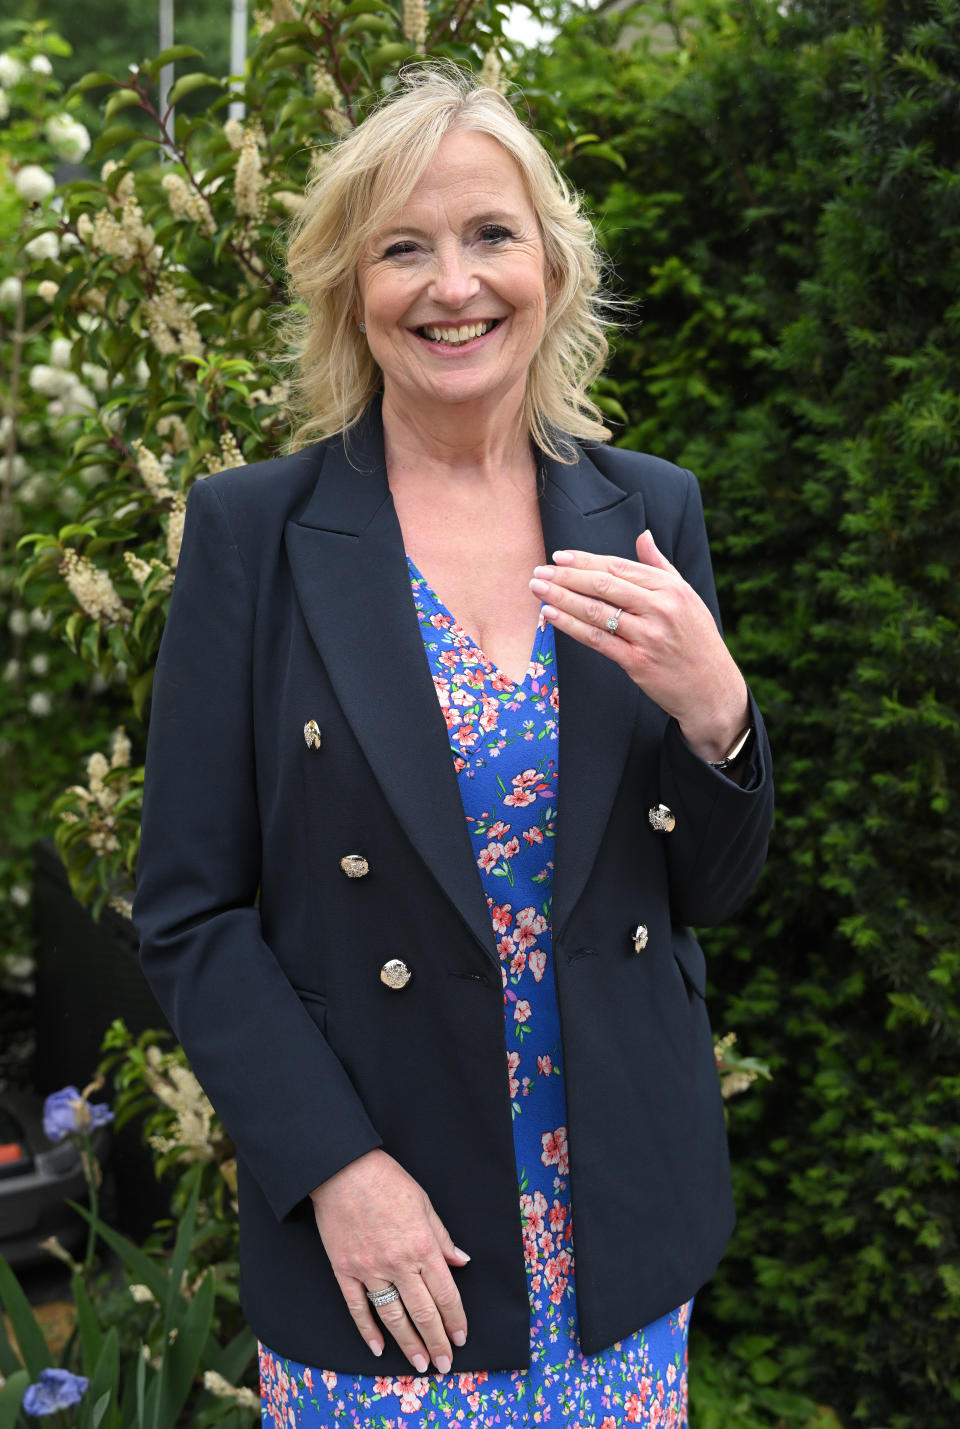 Carol Kirkwood showed off her engagement ring at the Chelsea Flower Show in 2022. (Getty)